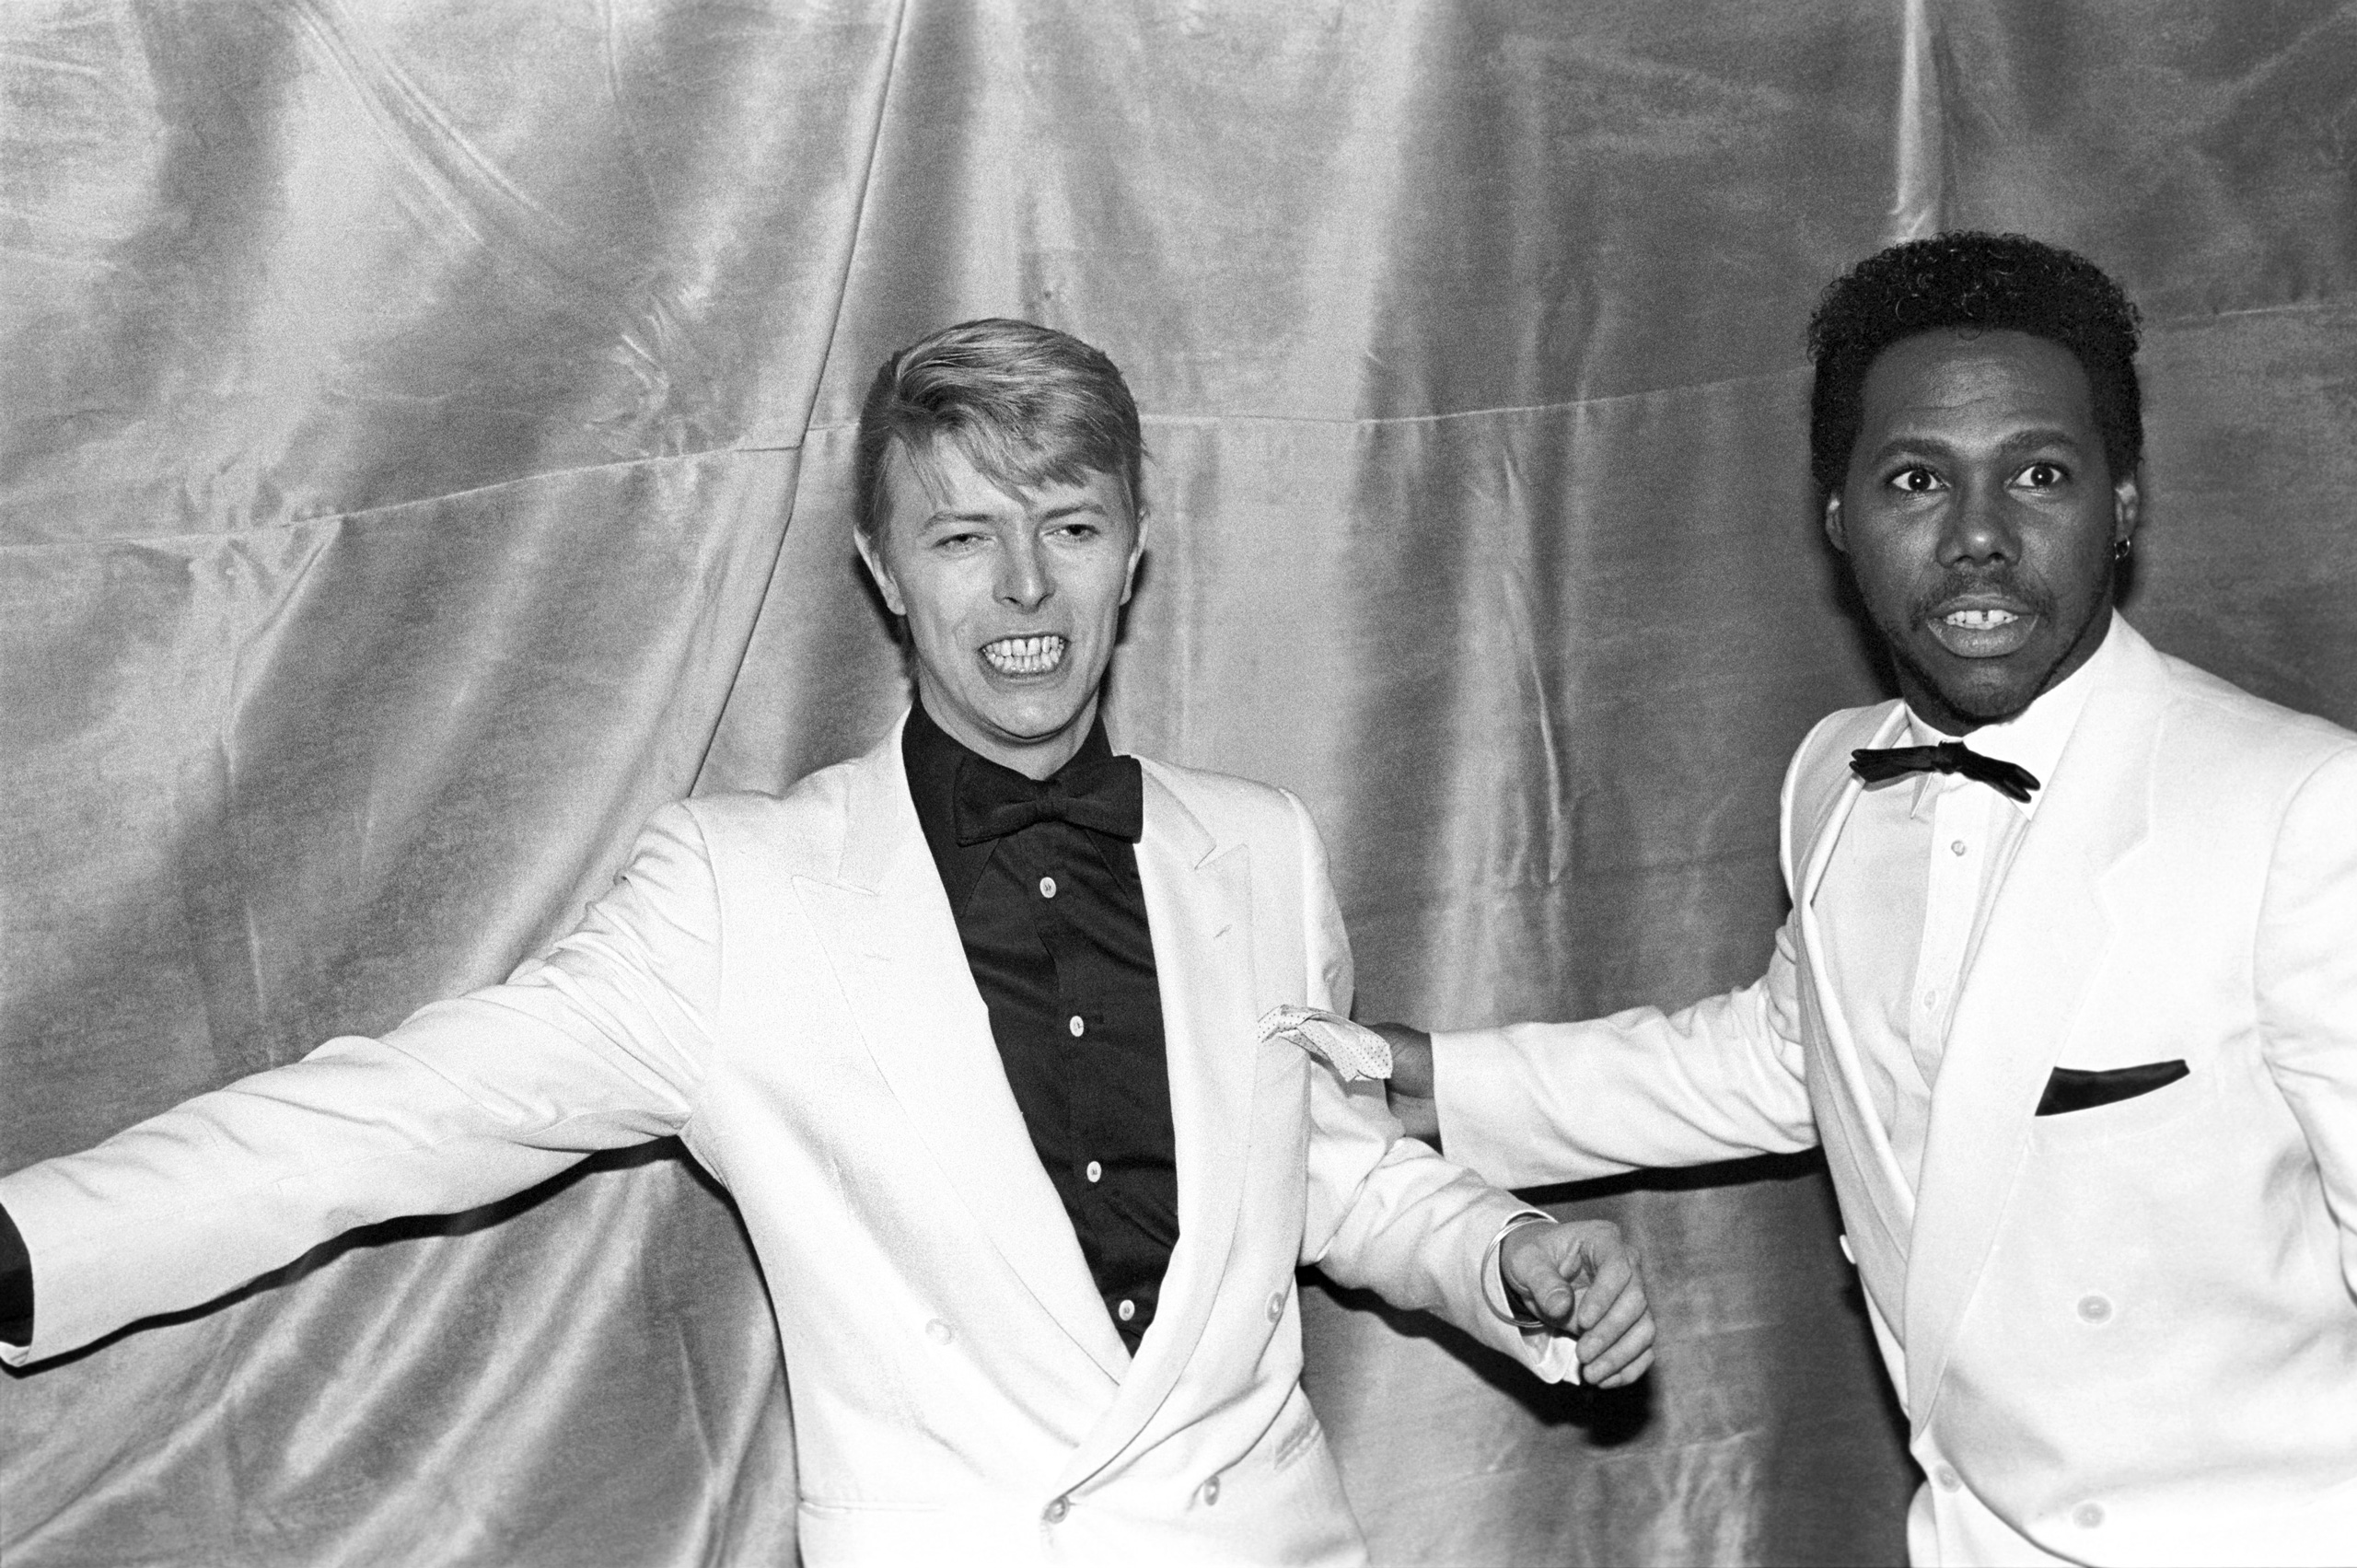 David Bowie with Nile Rodgers of Chic at the Frankie Crocker Awards at the Savoy in New York, on Jan. 21, 1983. (Ebet Roberts—Redferns)